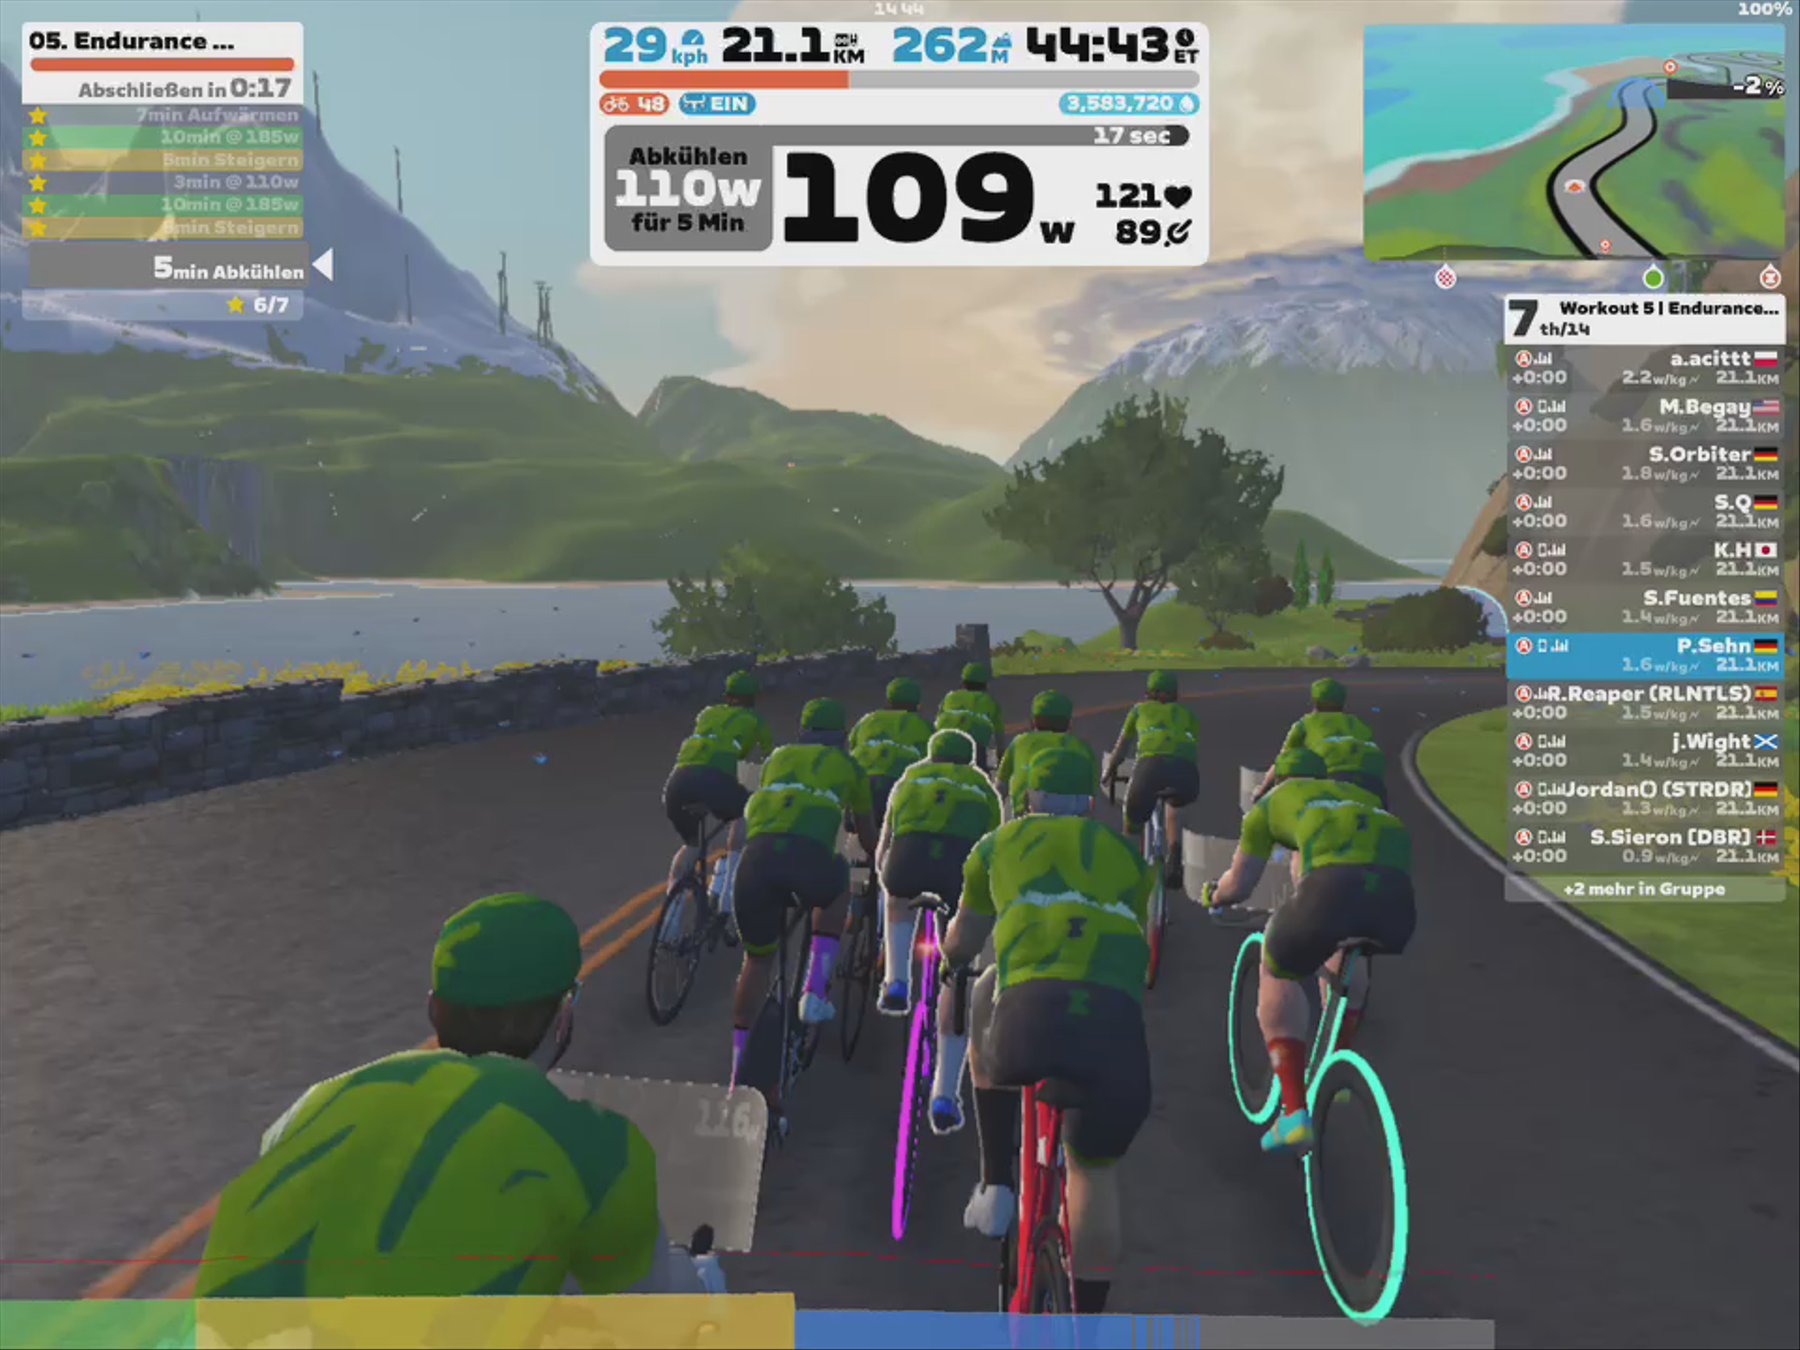 Zwift - Group Workout: Long - Endurance Ascent  on Downtown Titans in Watopia